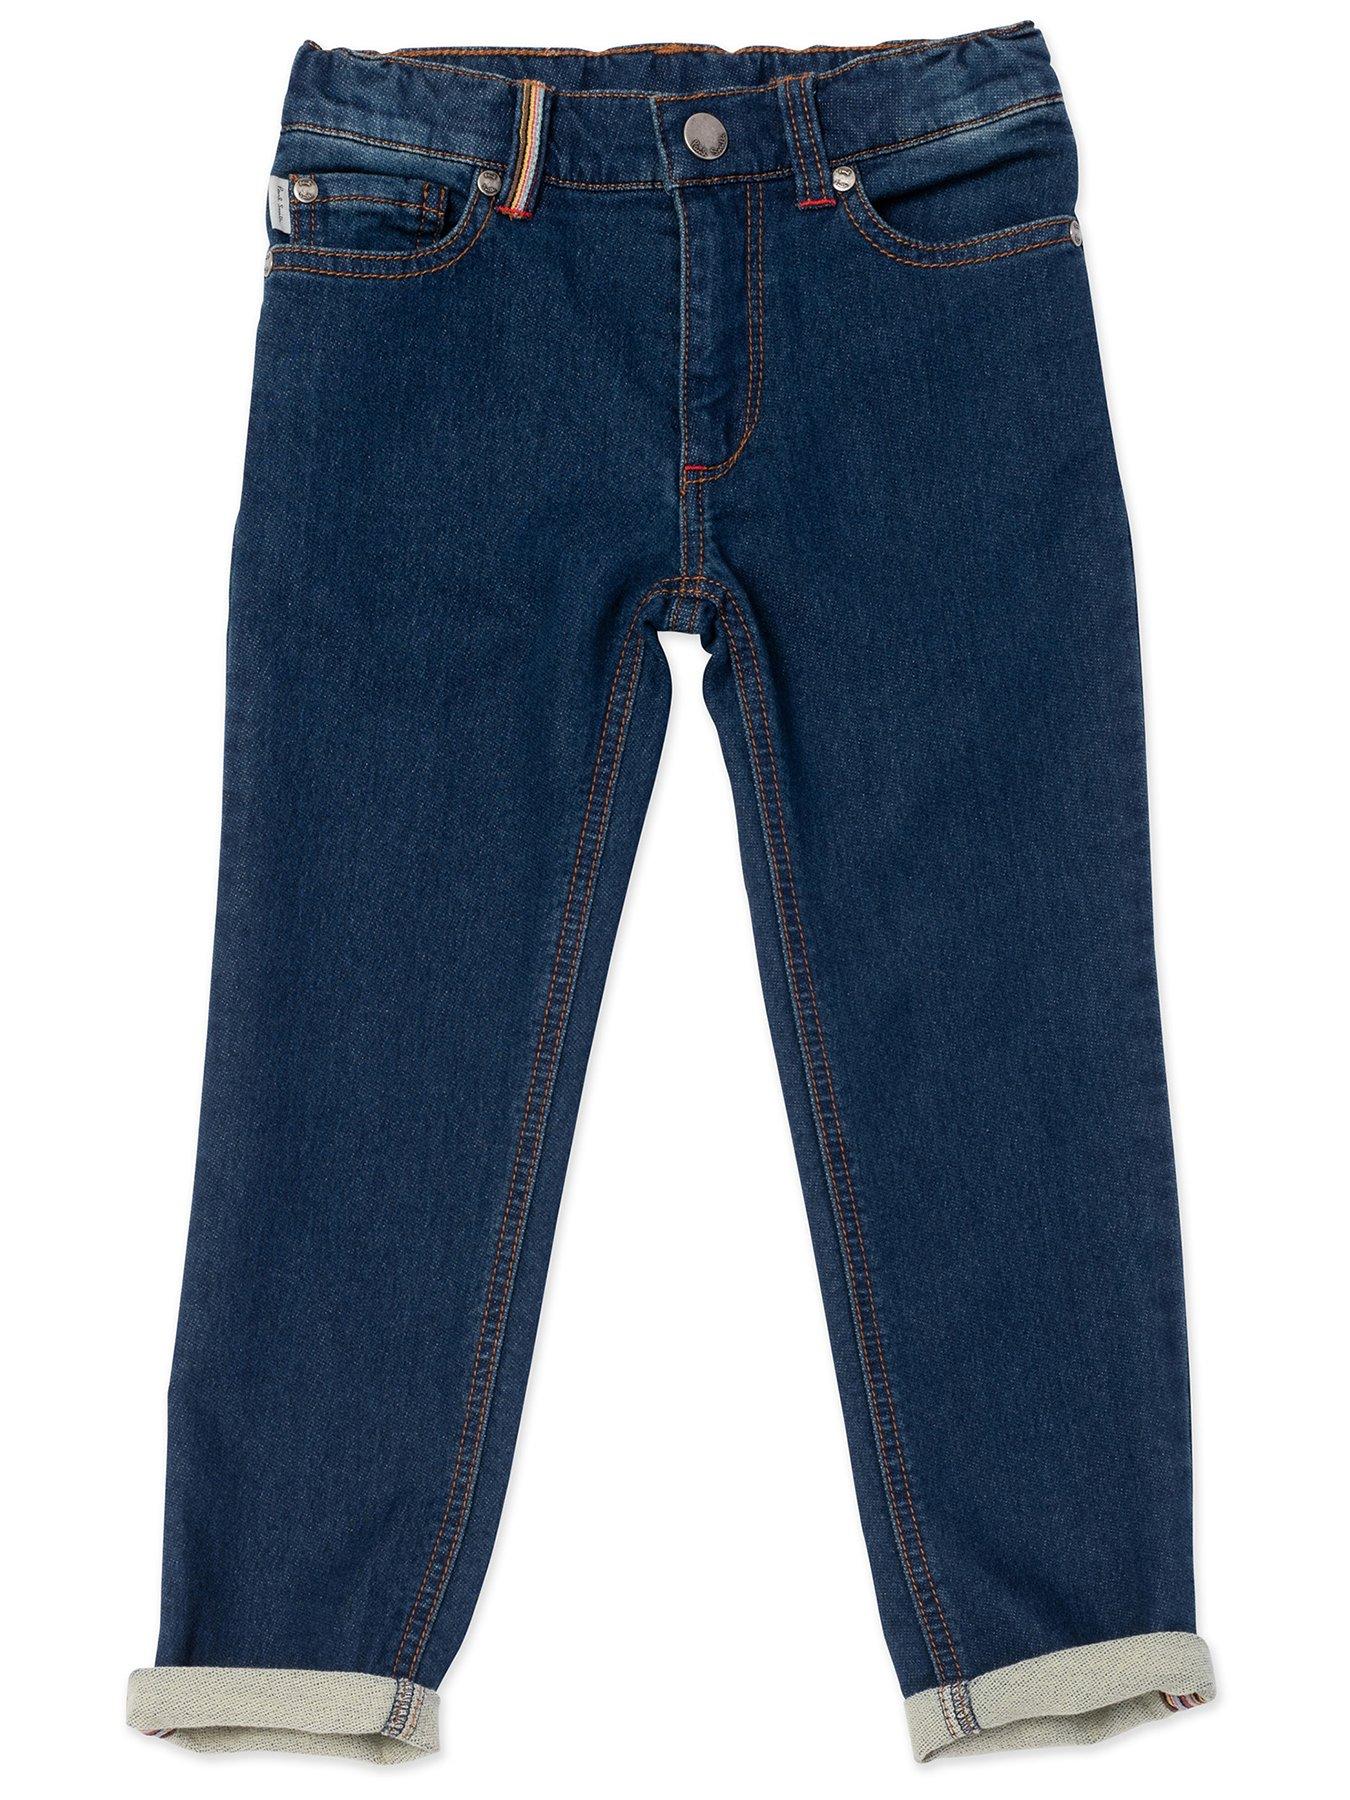 Boys Clothes Kids Delil Turn Up Straight Leg Jeans - Blue